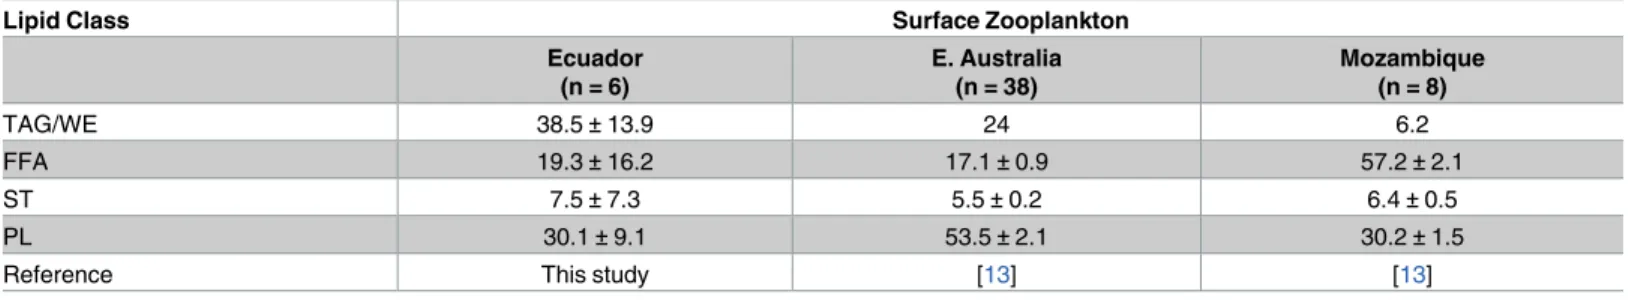 Table 4. Average lipid class (LC) profiles of surface zooplankton from a Mobula birostris aggregation site in Ecuador (this study), and from Mobula alfredi aggregation sites in eastern Australia and Mozambique [13].